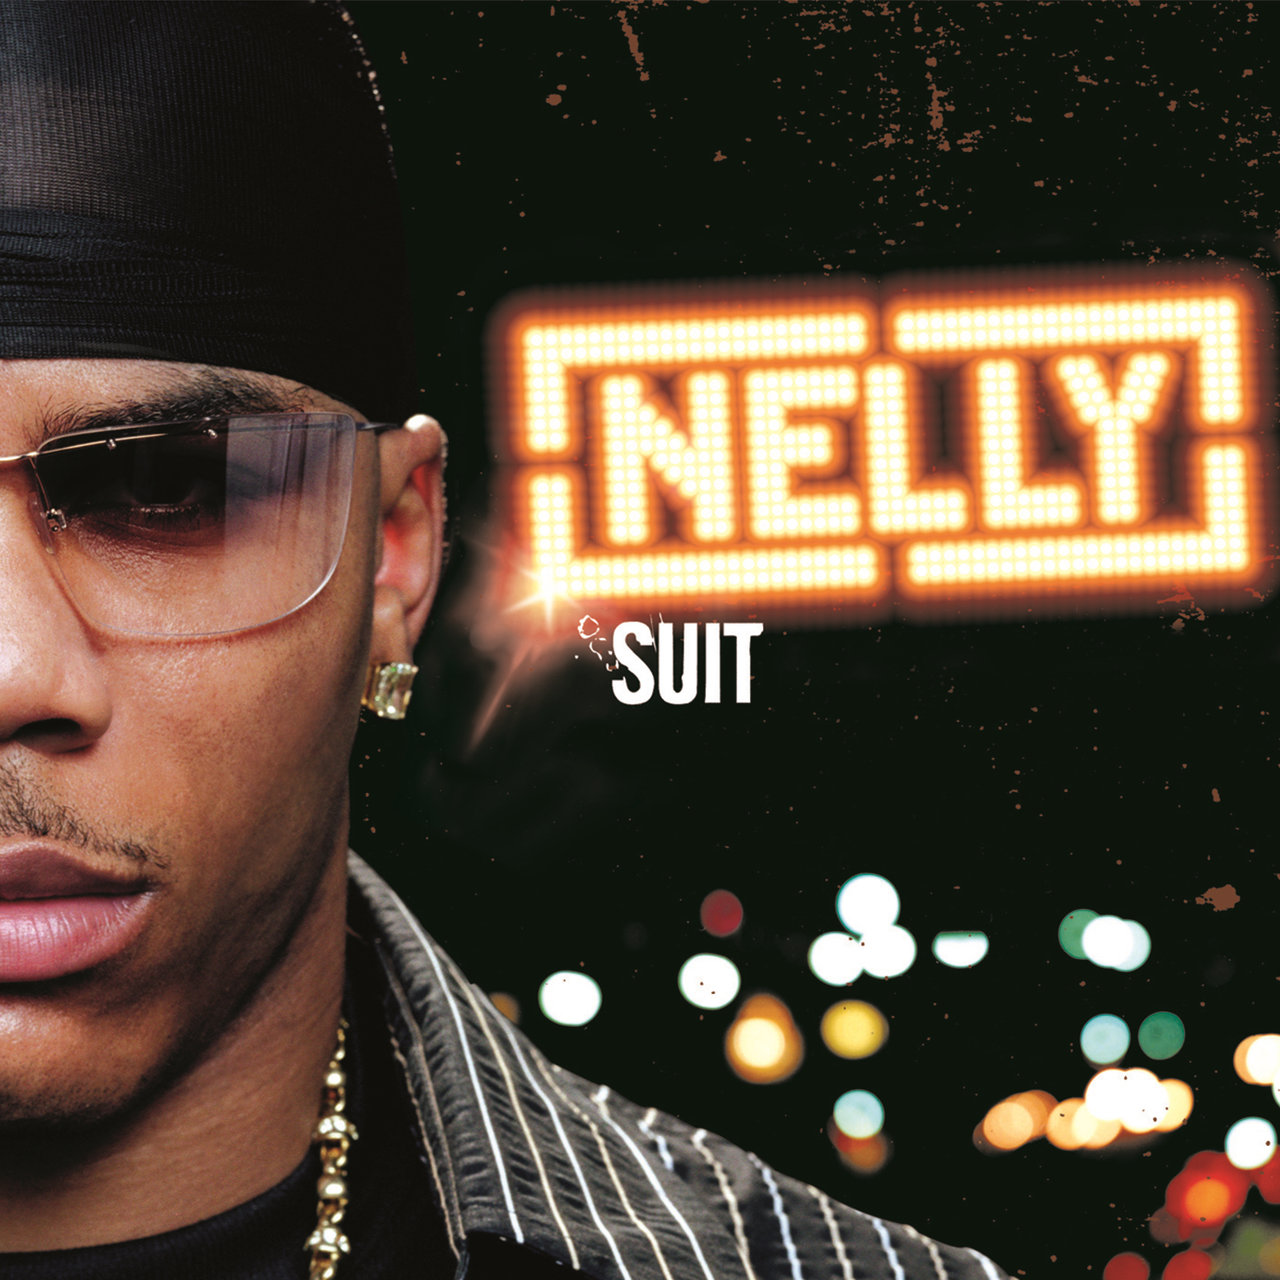 Nelly - Suit (Cover)